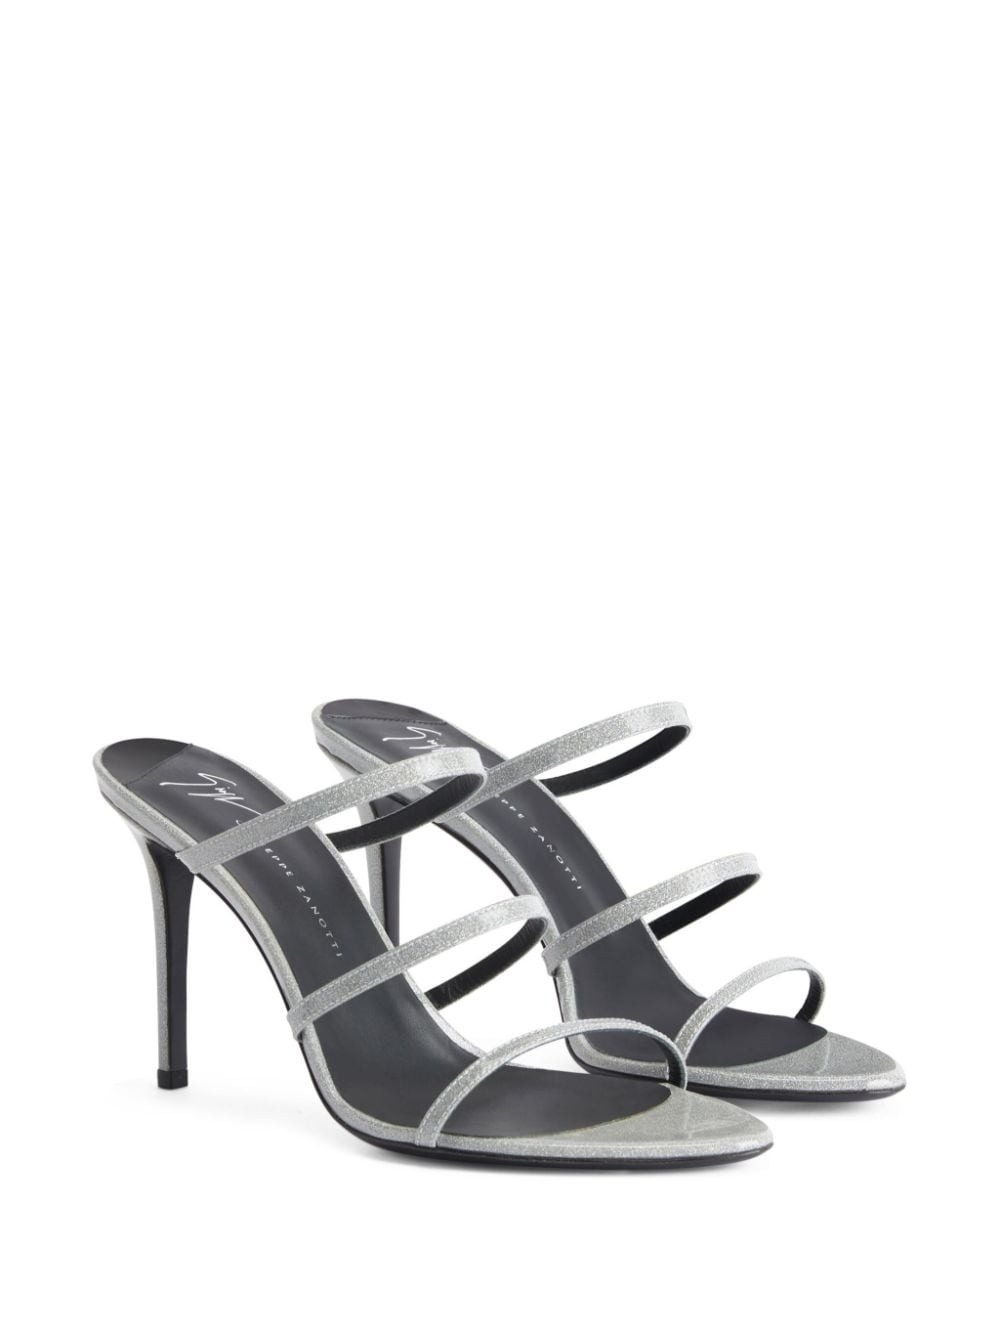 Alimha 90mm leather sandals - 2